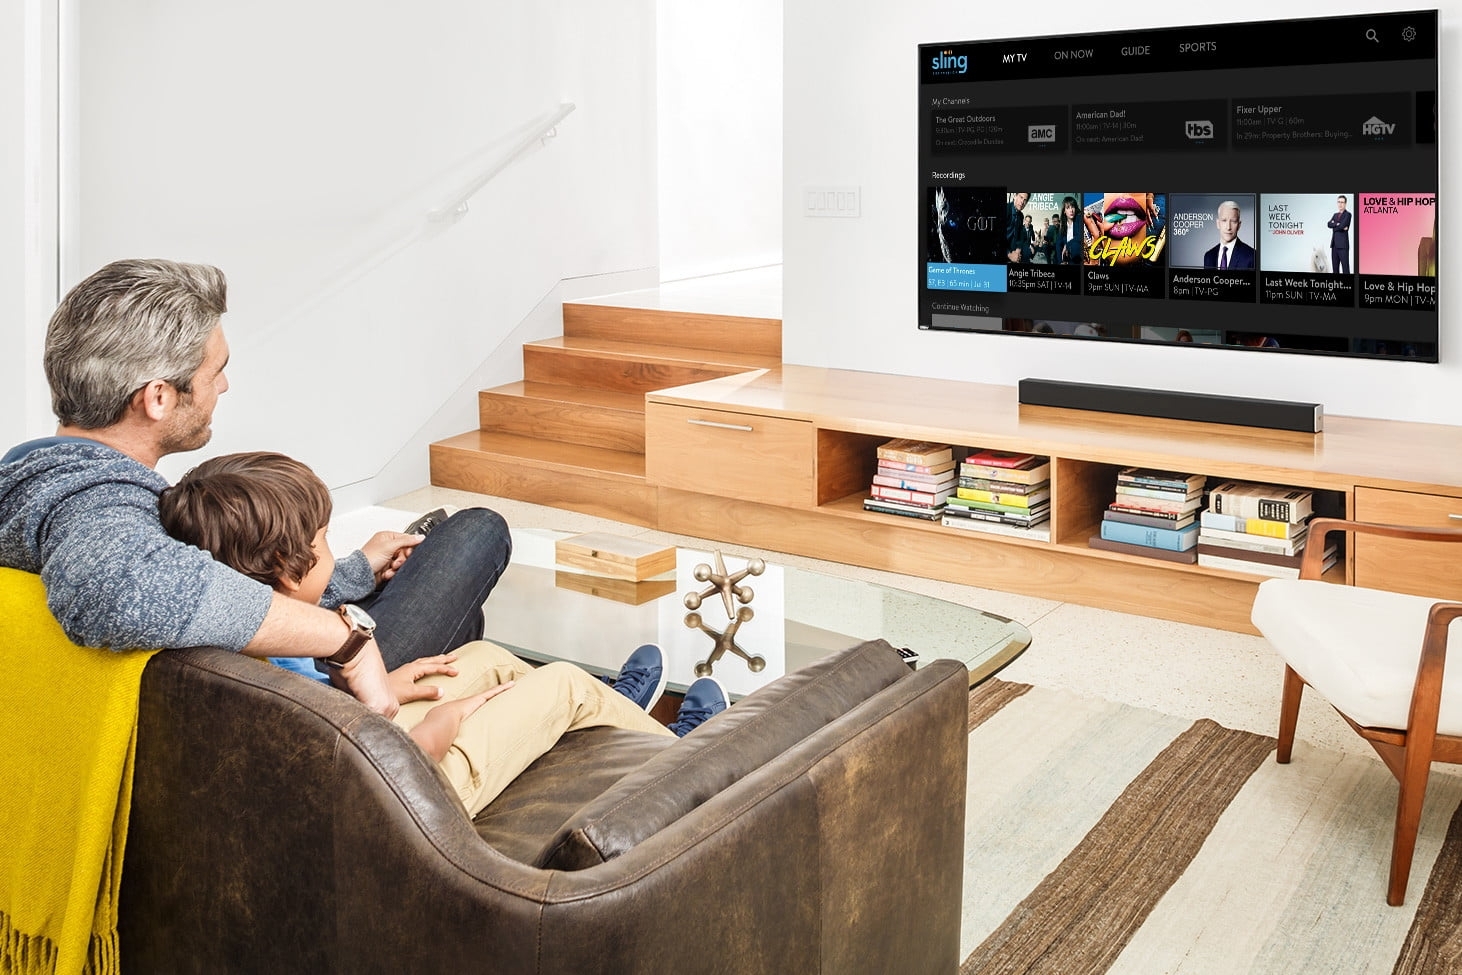 How To Get A Sling TV for FREE